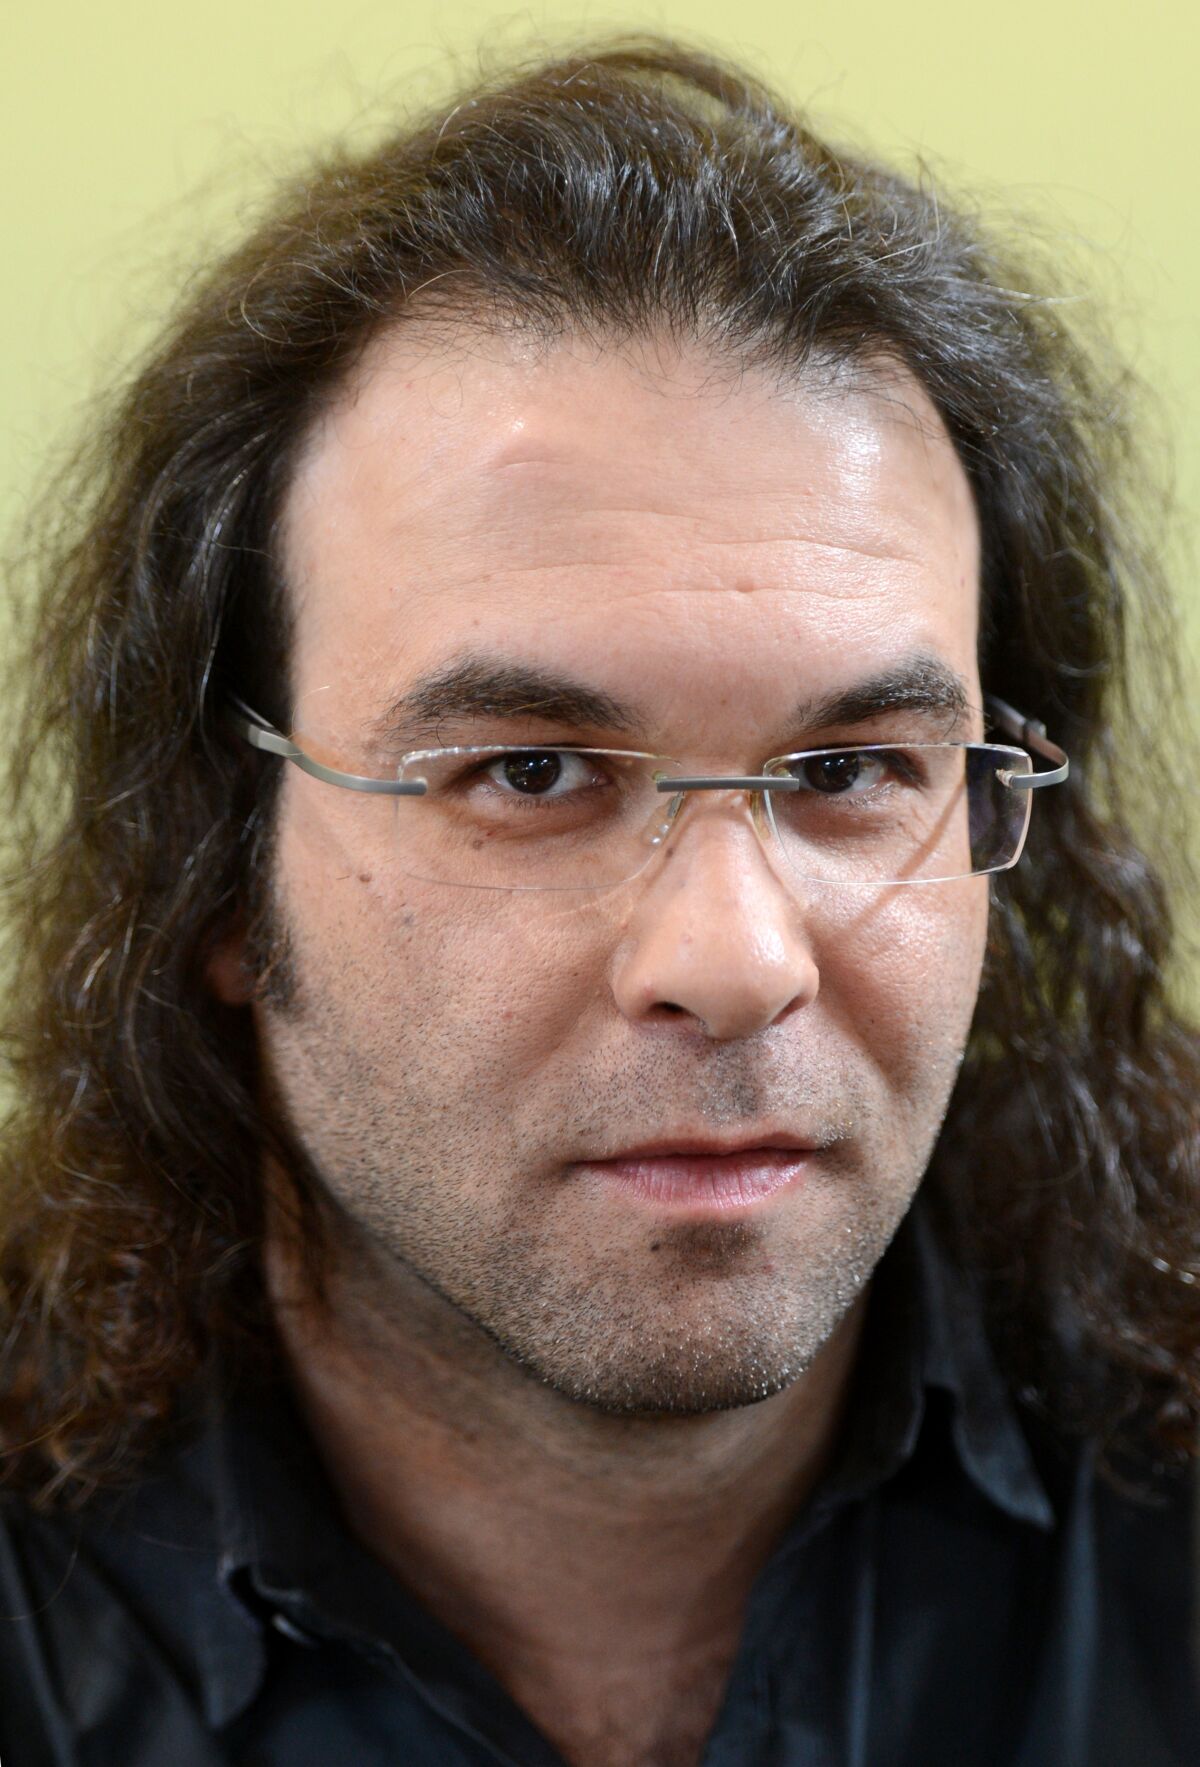 A headshot of a man with glasses and long, wavy hair.